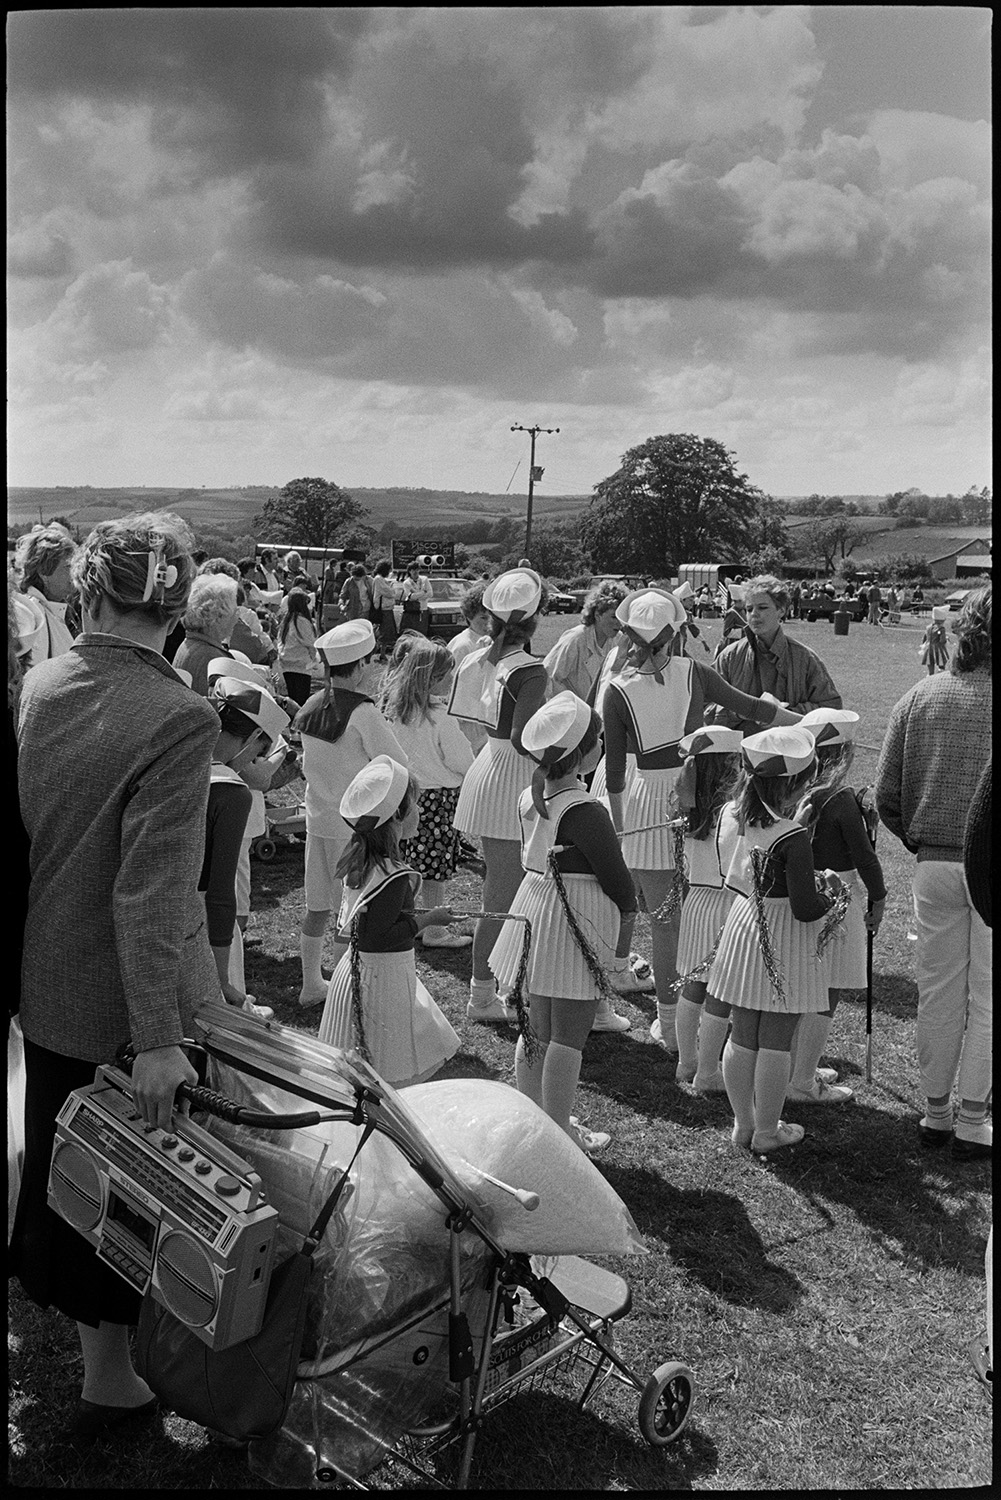 School fete, drum majorettes competition, early tractor display, mothers and children.
[People gathered in a field for the Chulmleigh School Fete. A group of majorettes are getting ready to perform. A woman with a pram and tape player is visible in the foreground.]